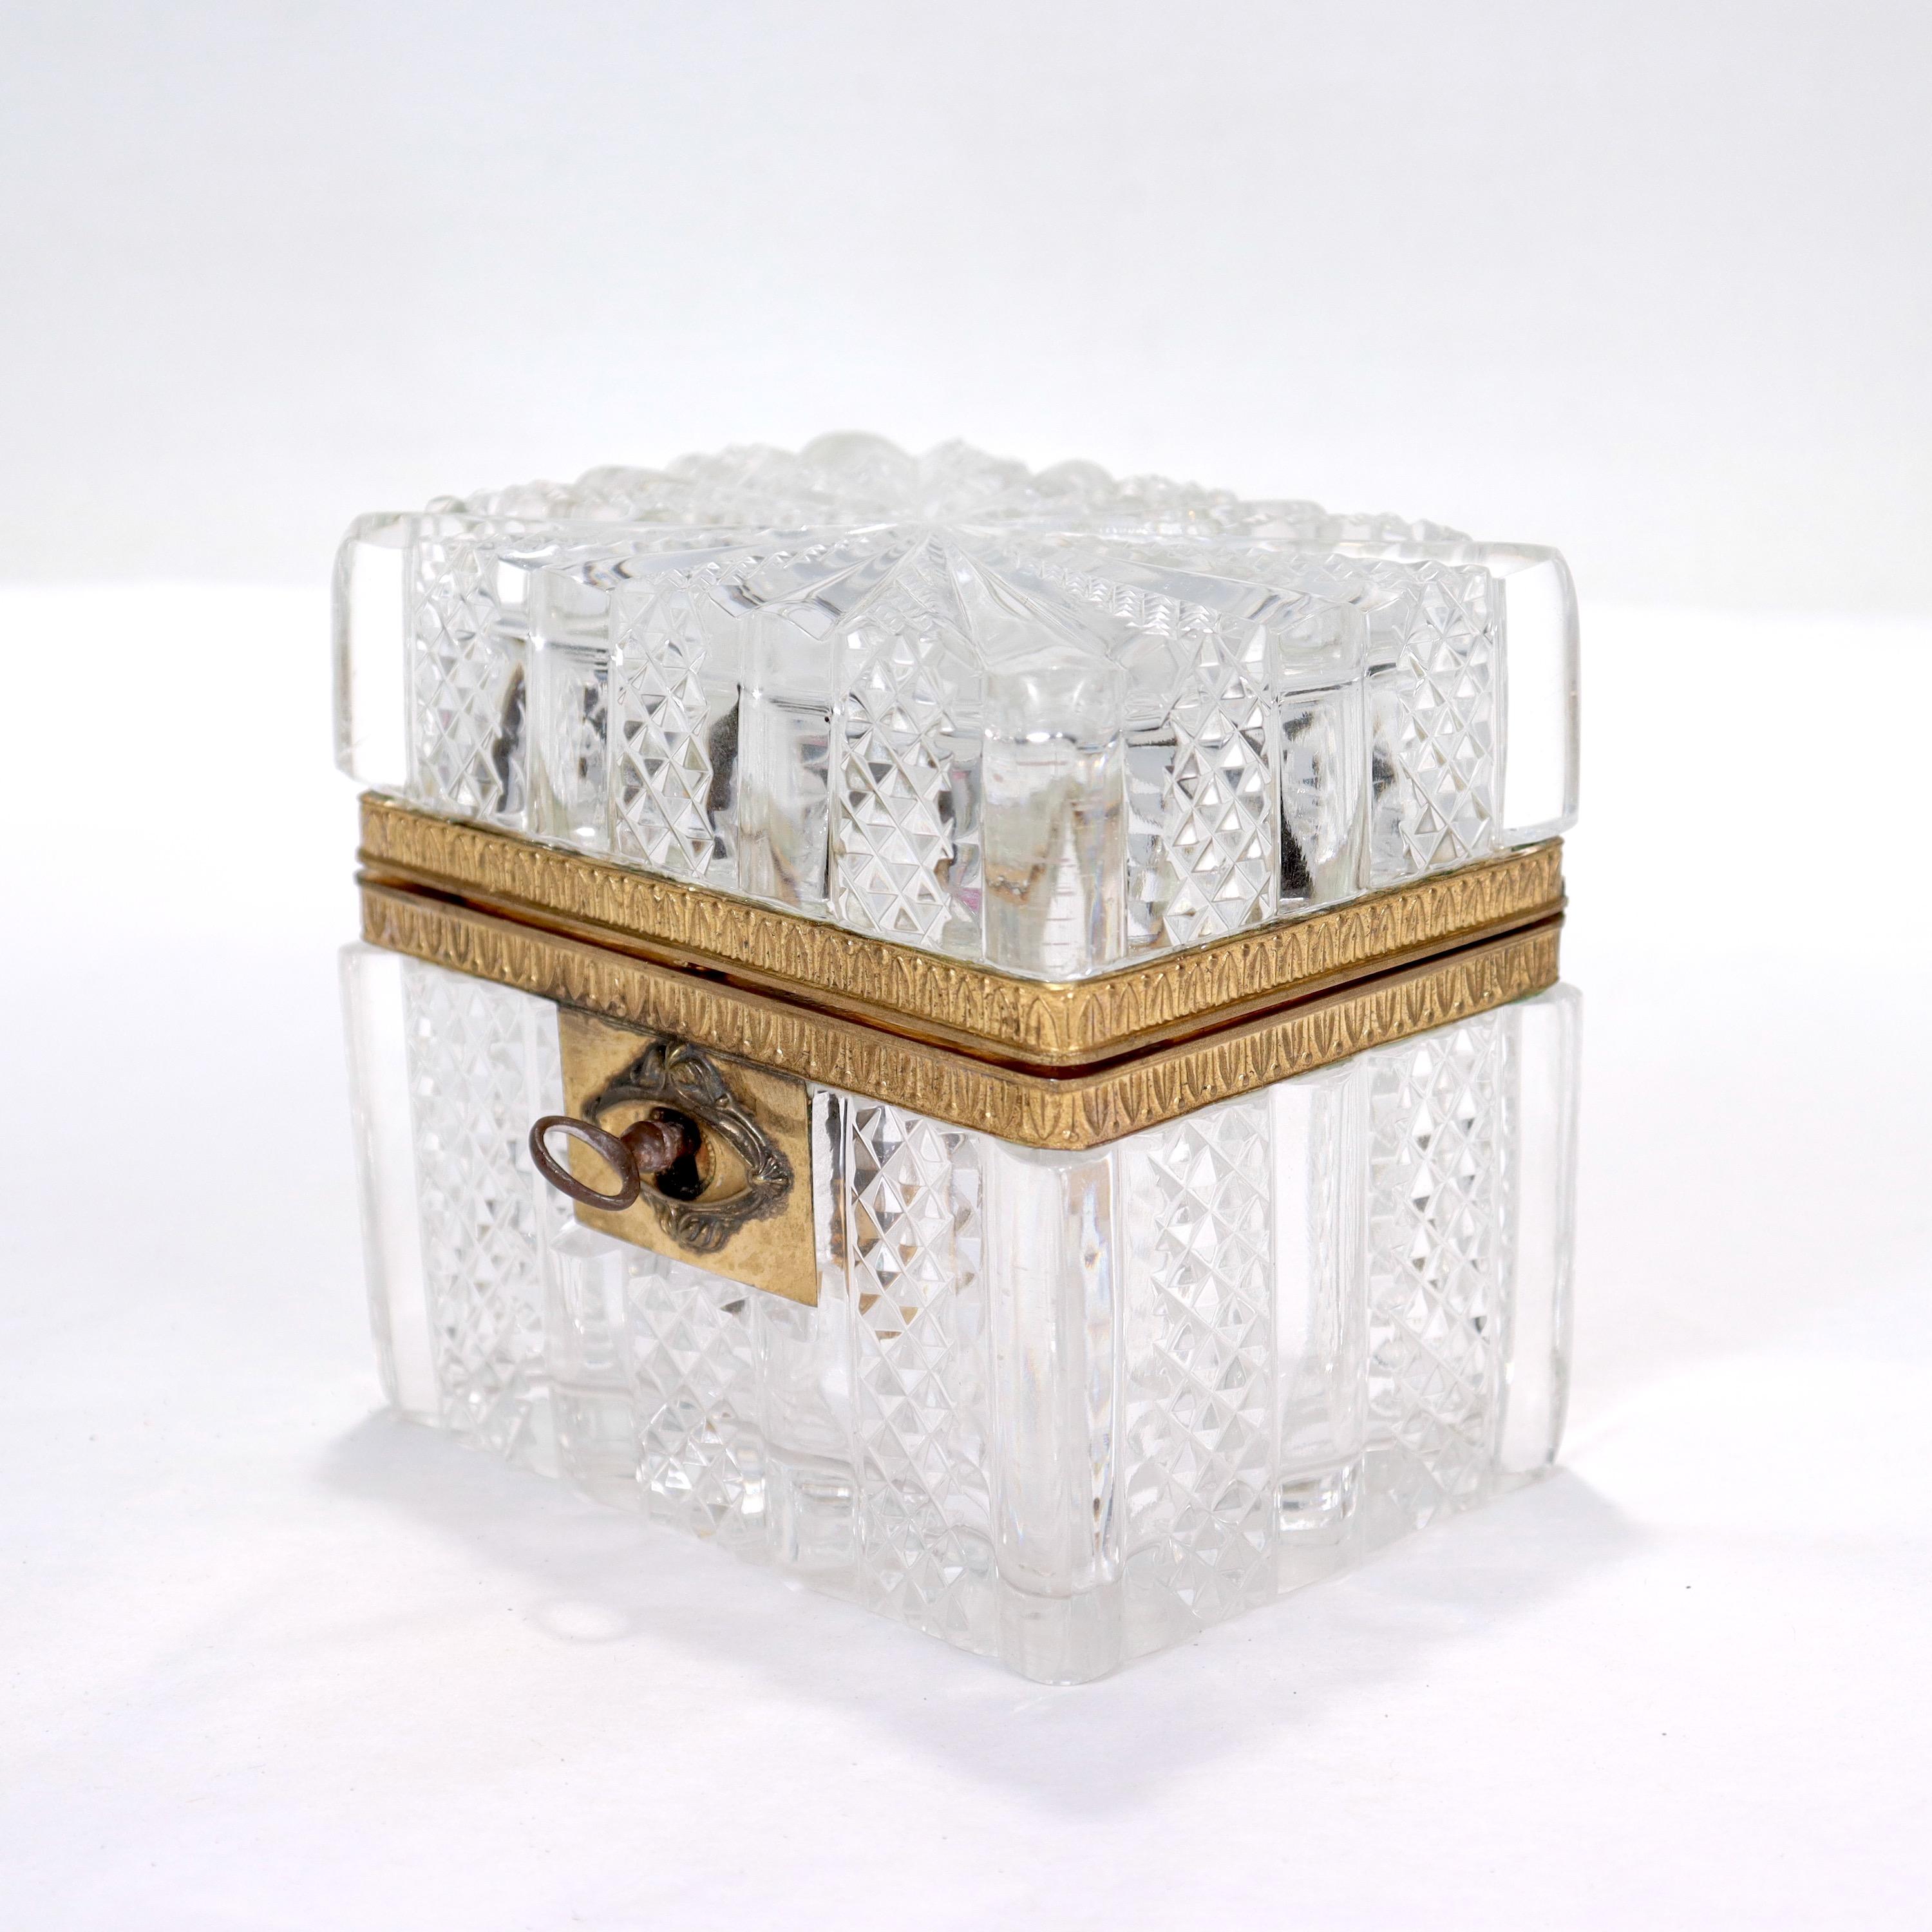 A fine antique French cut glass casket.

With a pressed and cut glass body and cover with a gilt bronze mount.

Together with an associated key (for a nonfunctional lock).

Simply a great French cut glass casket!

Date:
Early 19th Century

Overall